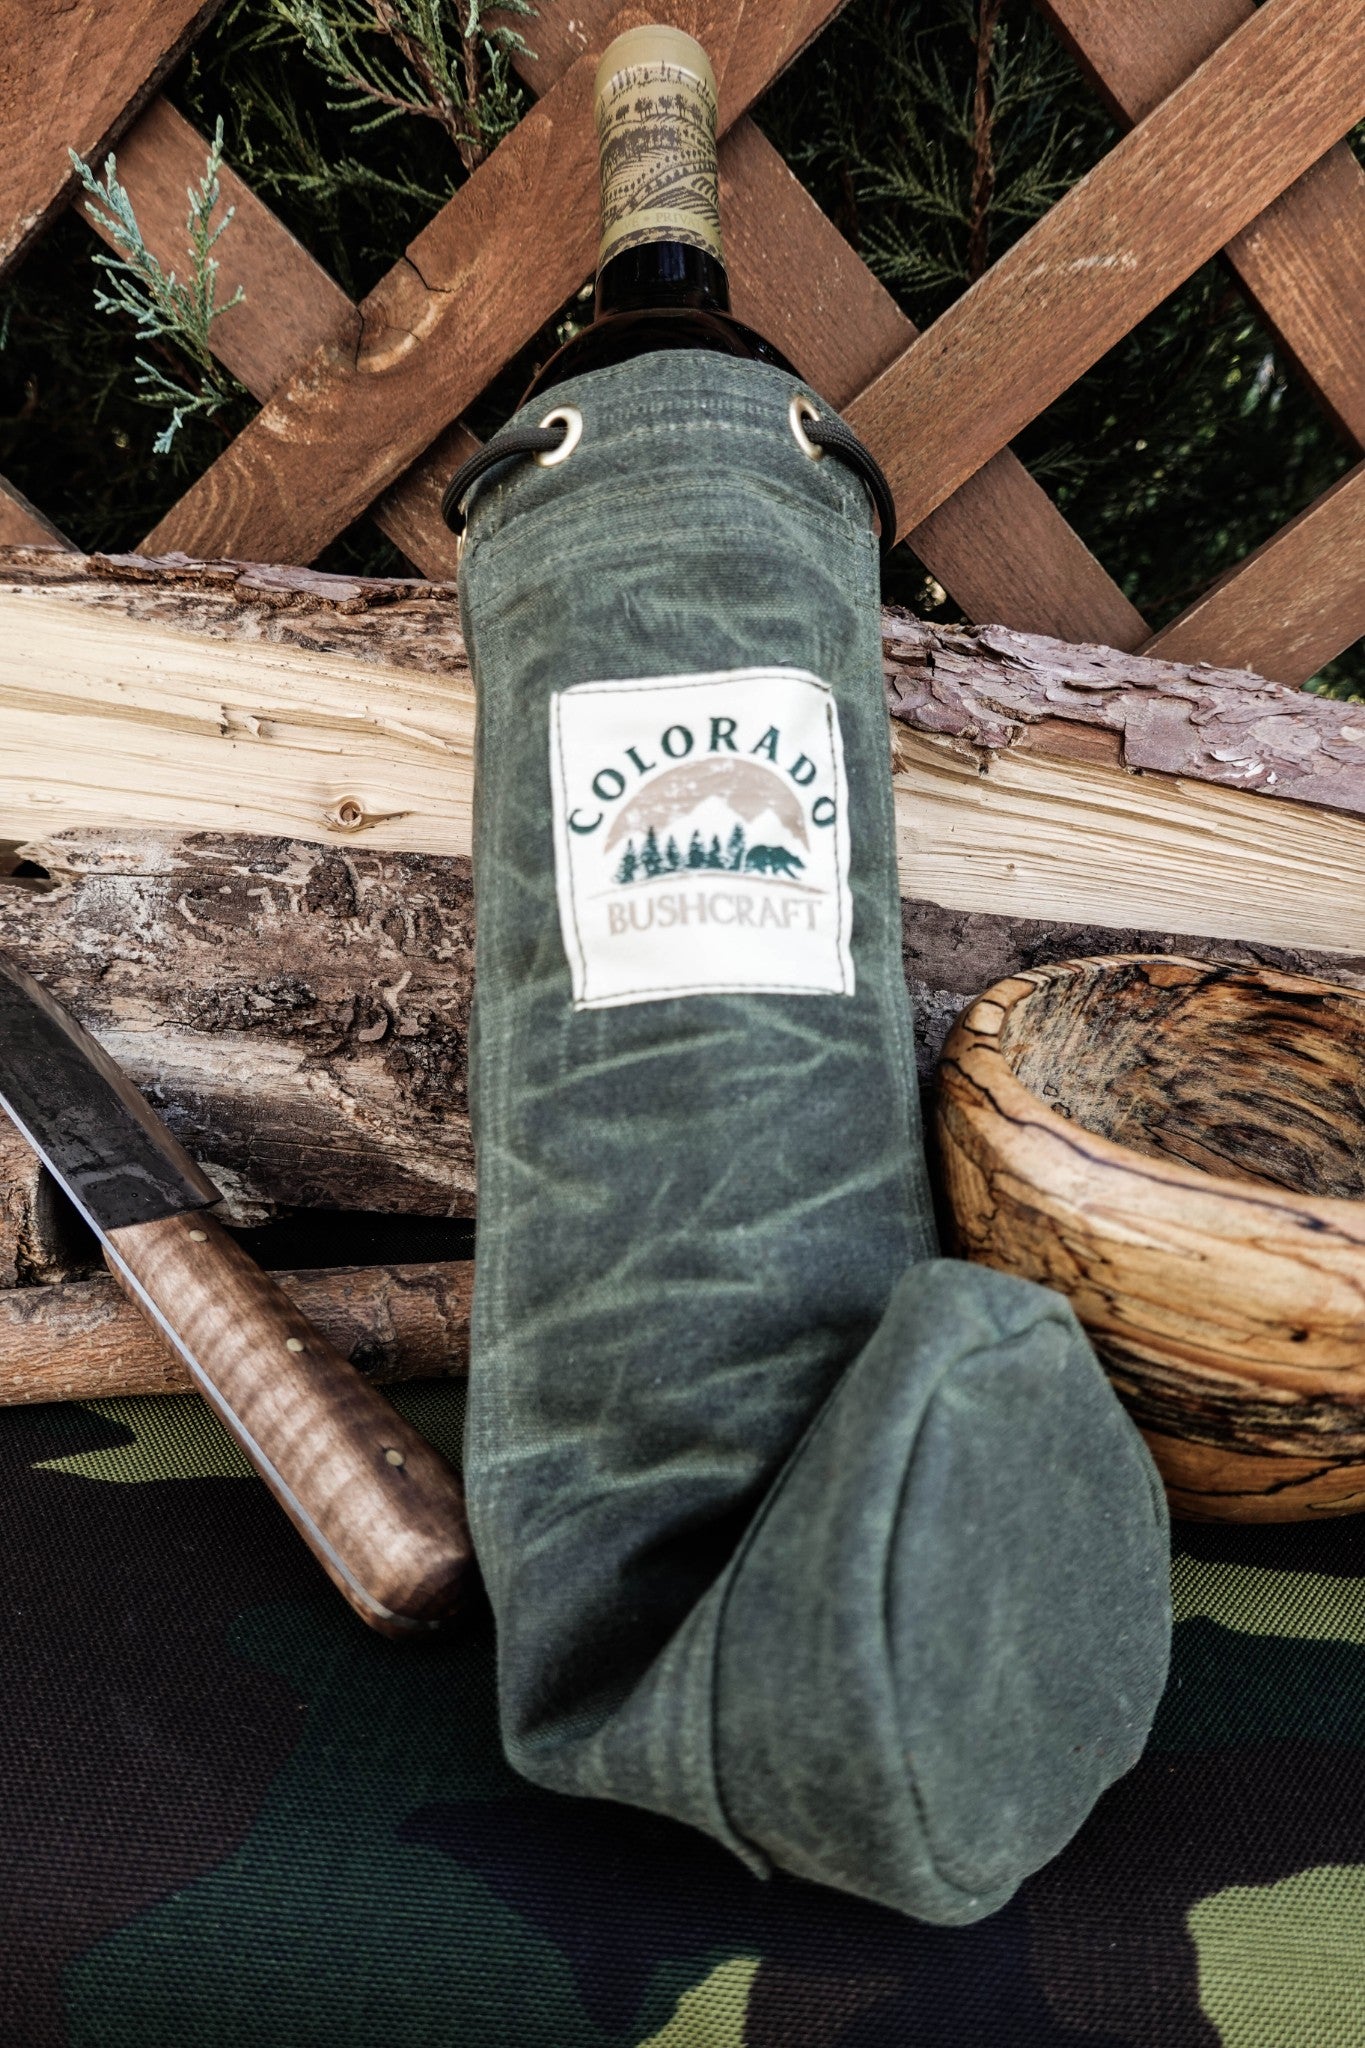 Handmade Waxed Canvas Wool Insulated Bushcraft Wine Bottle Carrier Coozie - Colorado Bushcraft